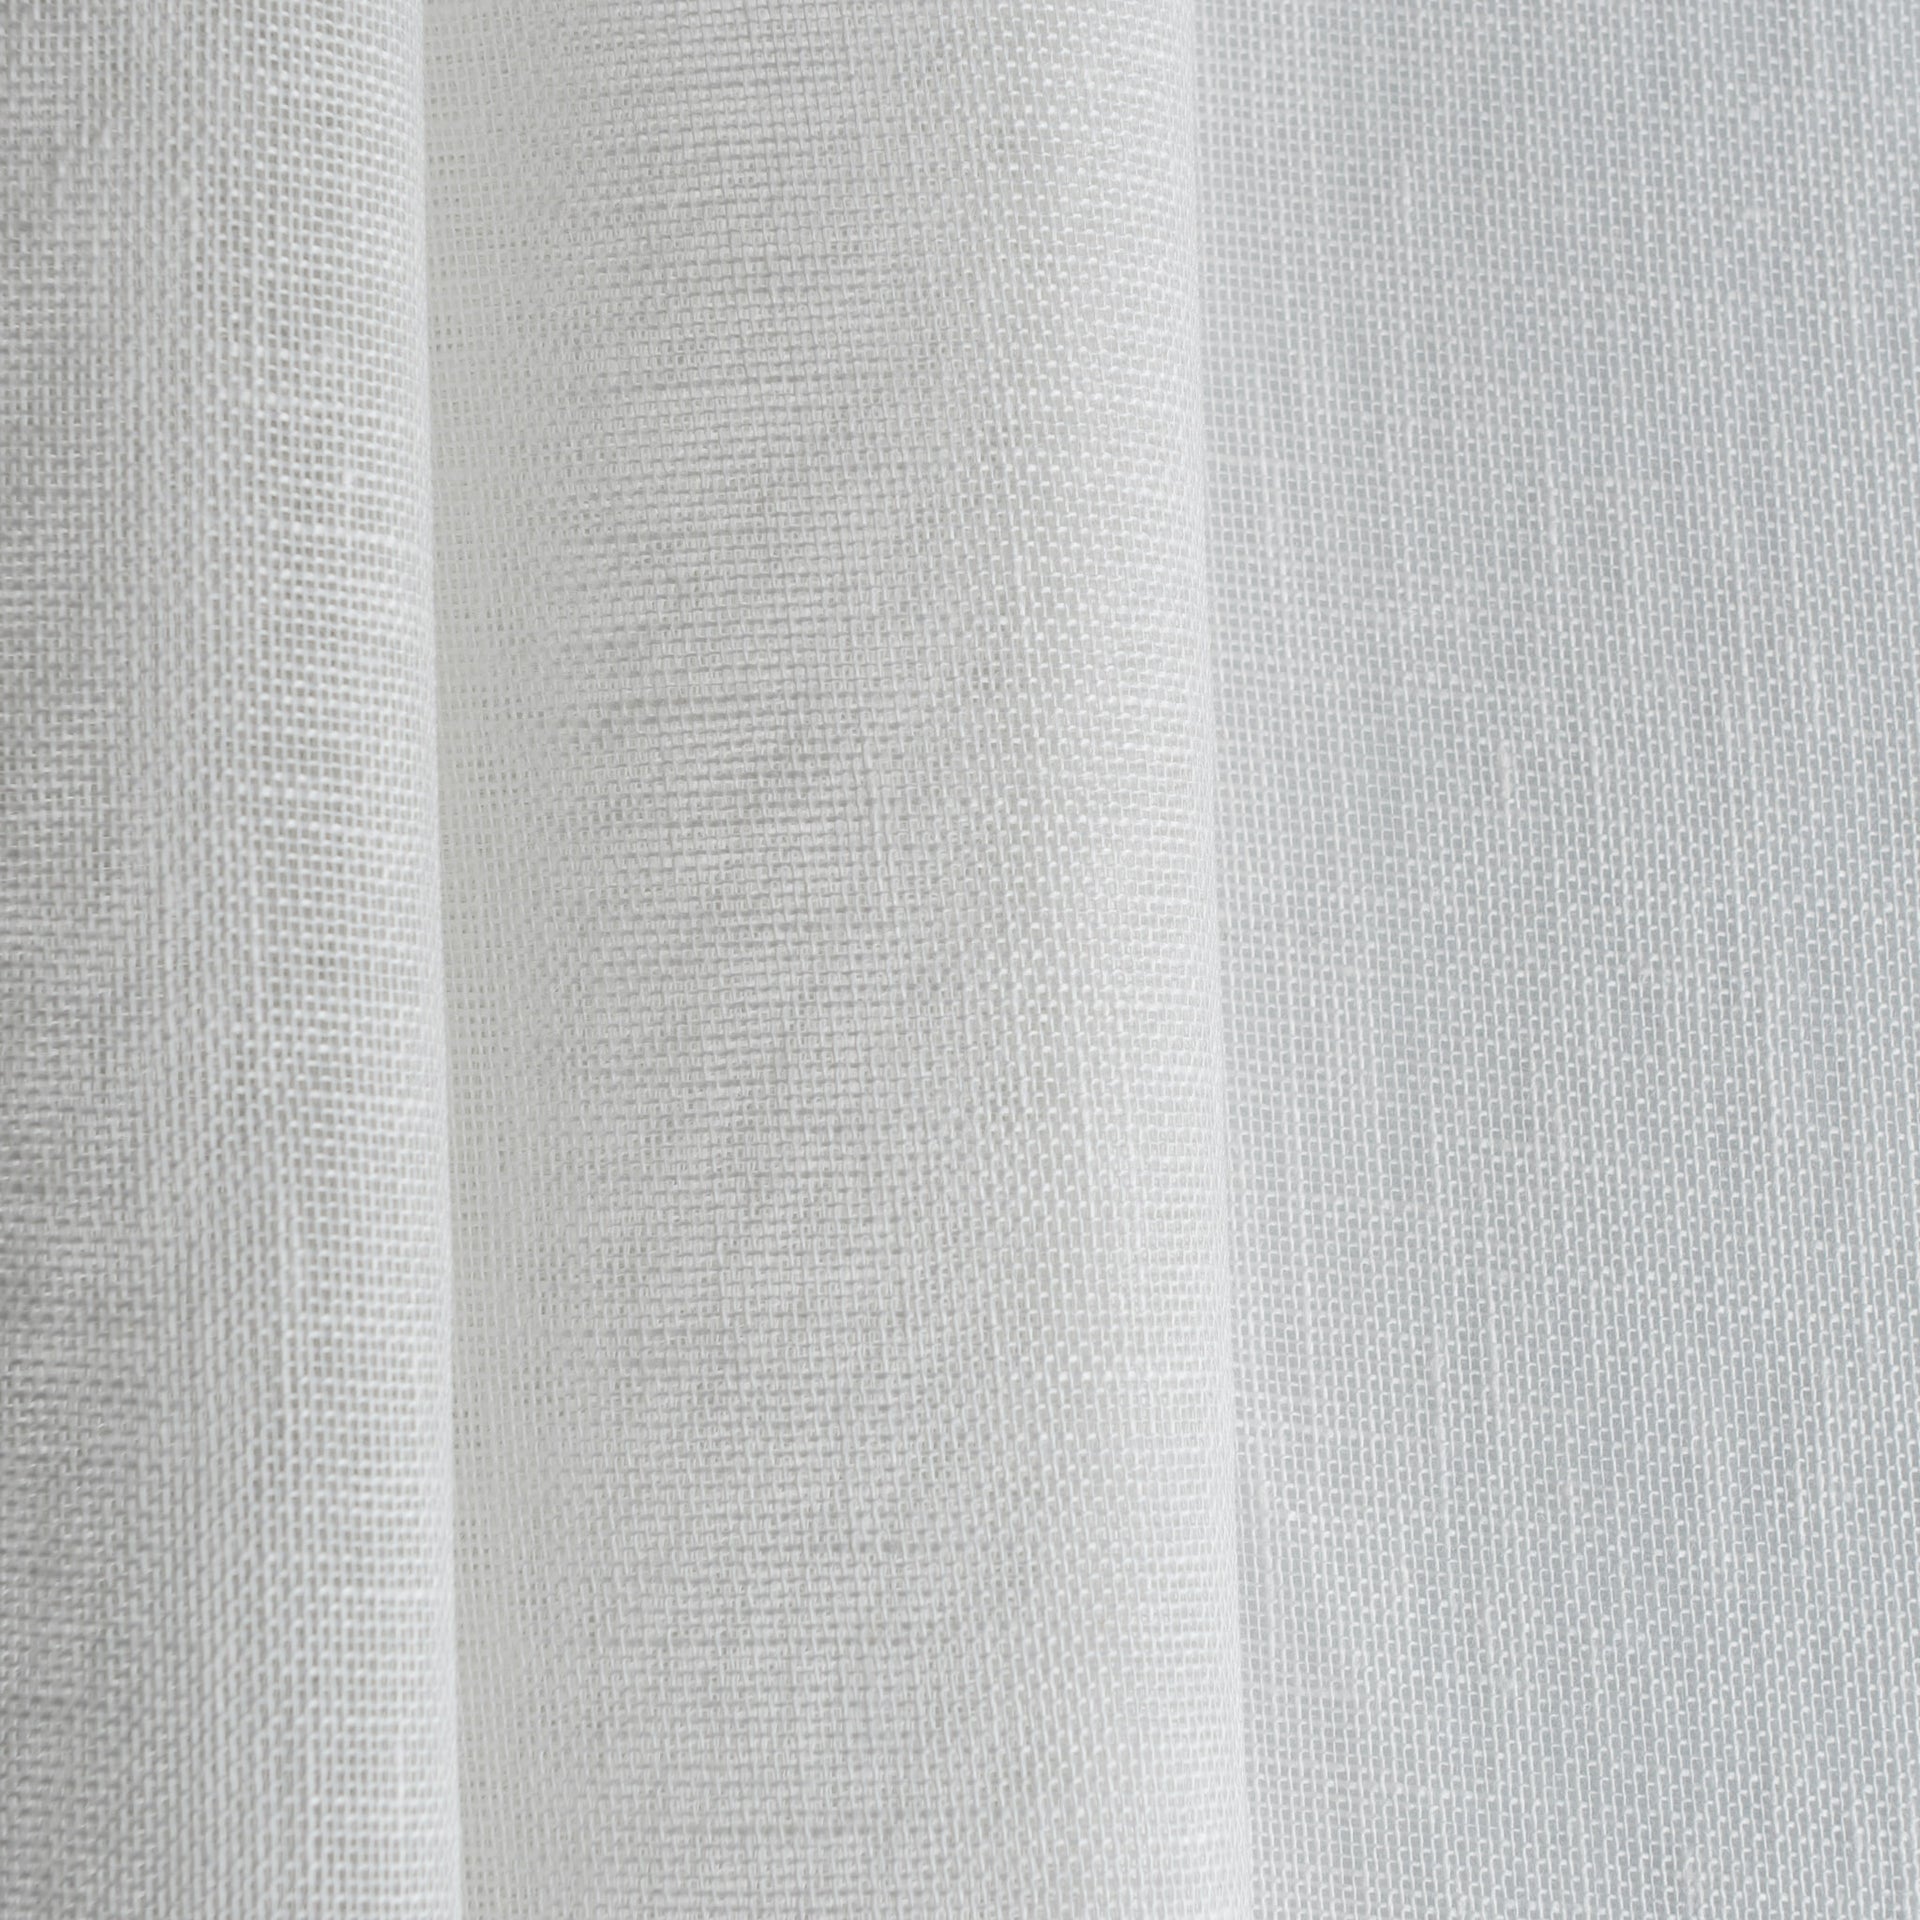 Off-White Linen Sheer Fabric by the Yard - 100% French Natural - Width 52”- 106”